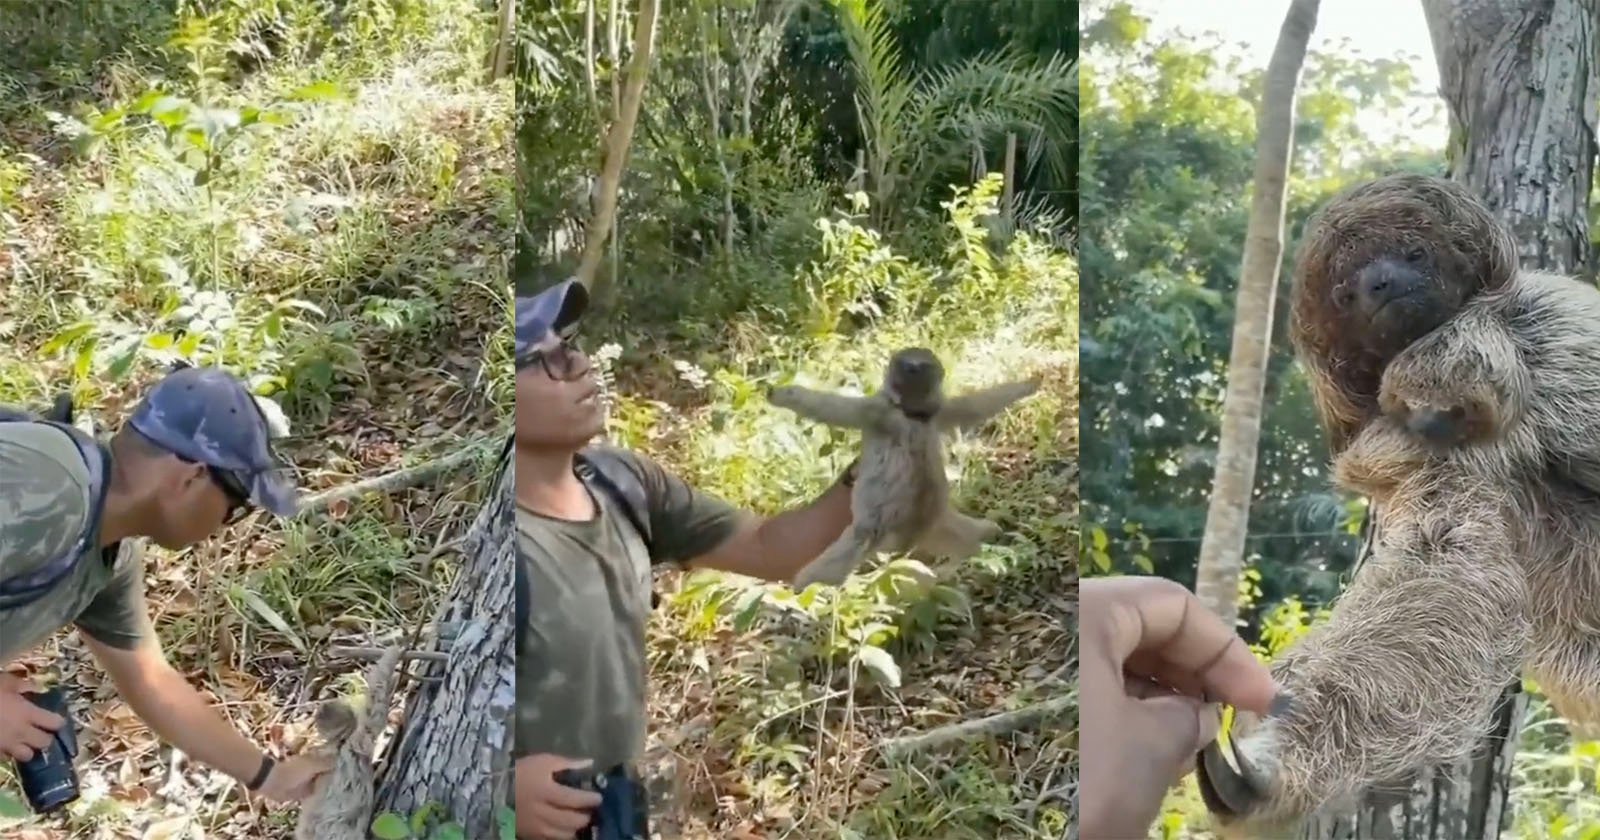  adorable moment photographer helps baby sloth mother 